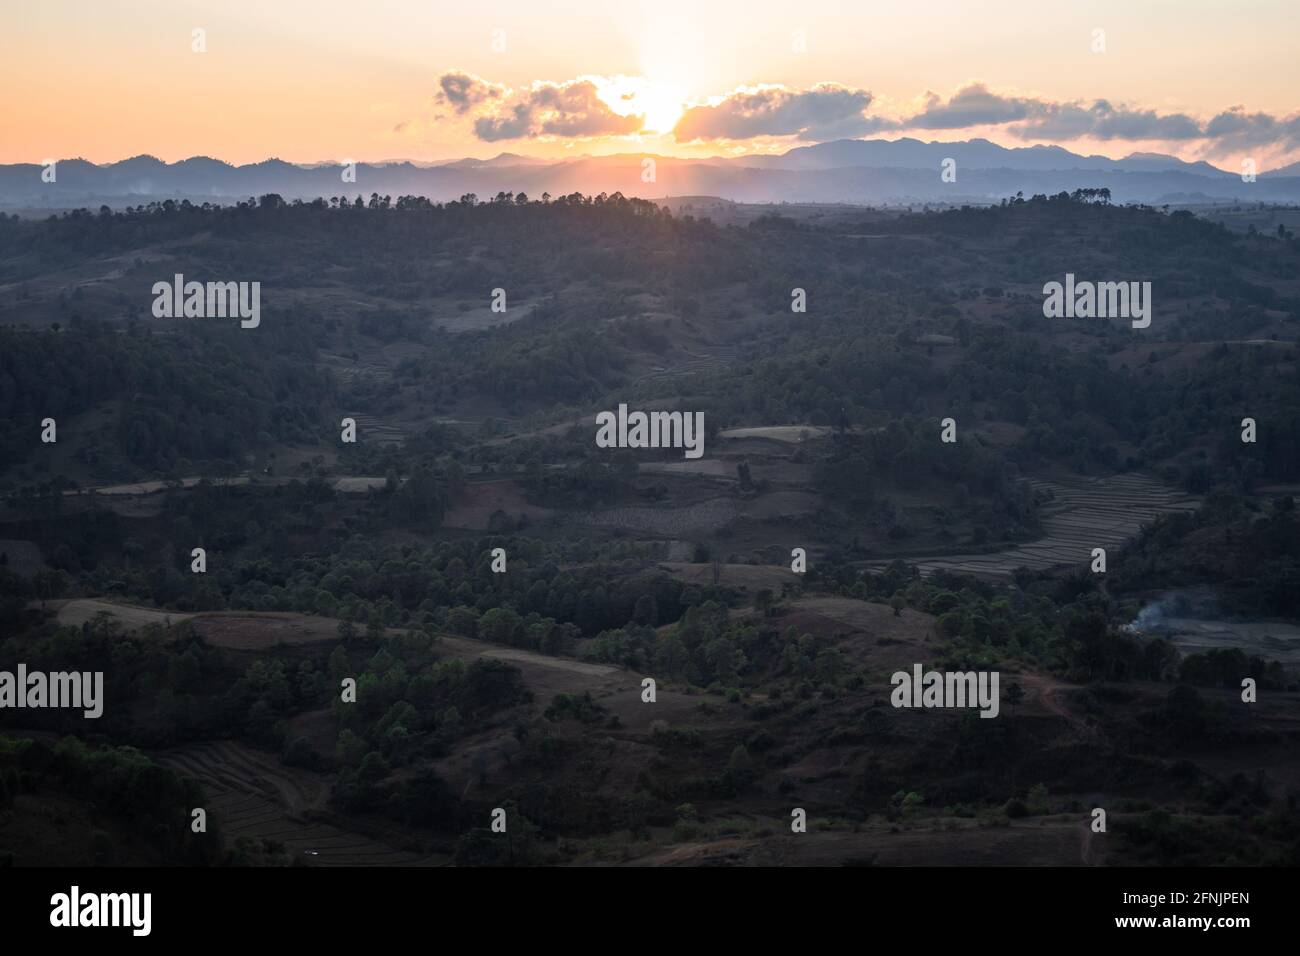 Orange sunset from a viewpoint looking out over the farm lands and hills underneath in a valley between Kalaw and Inle Lake, Shan state, Myanmar Stock Photo